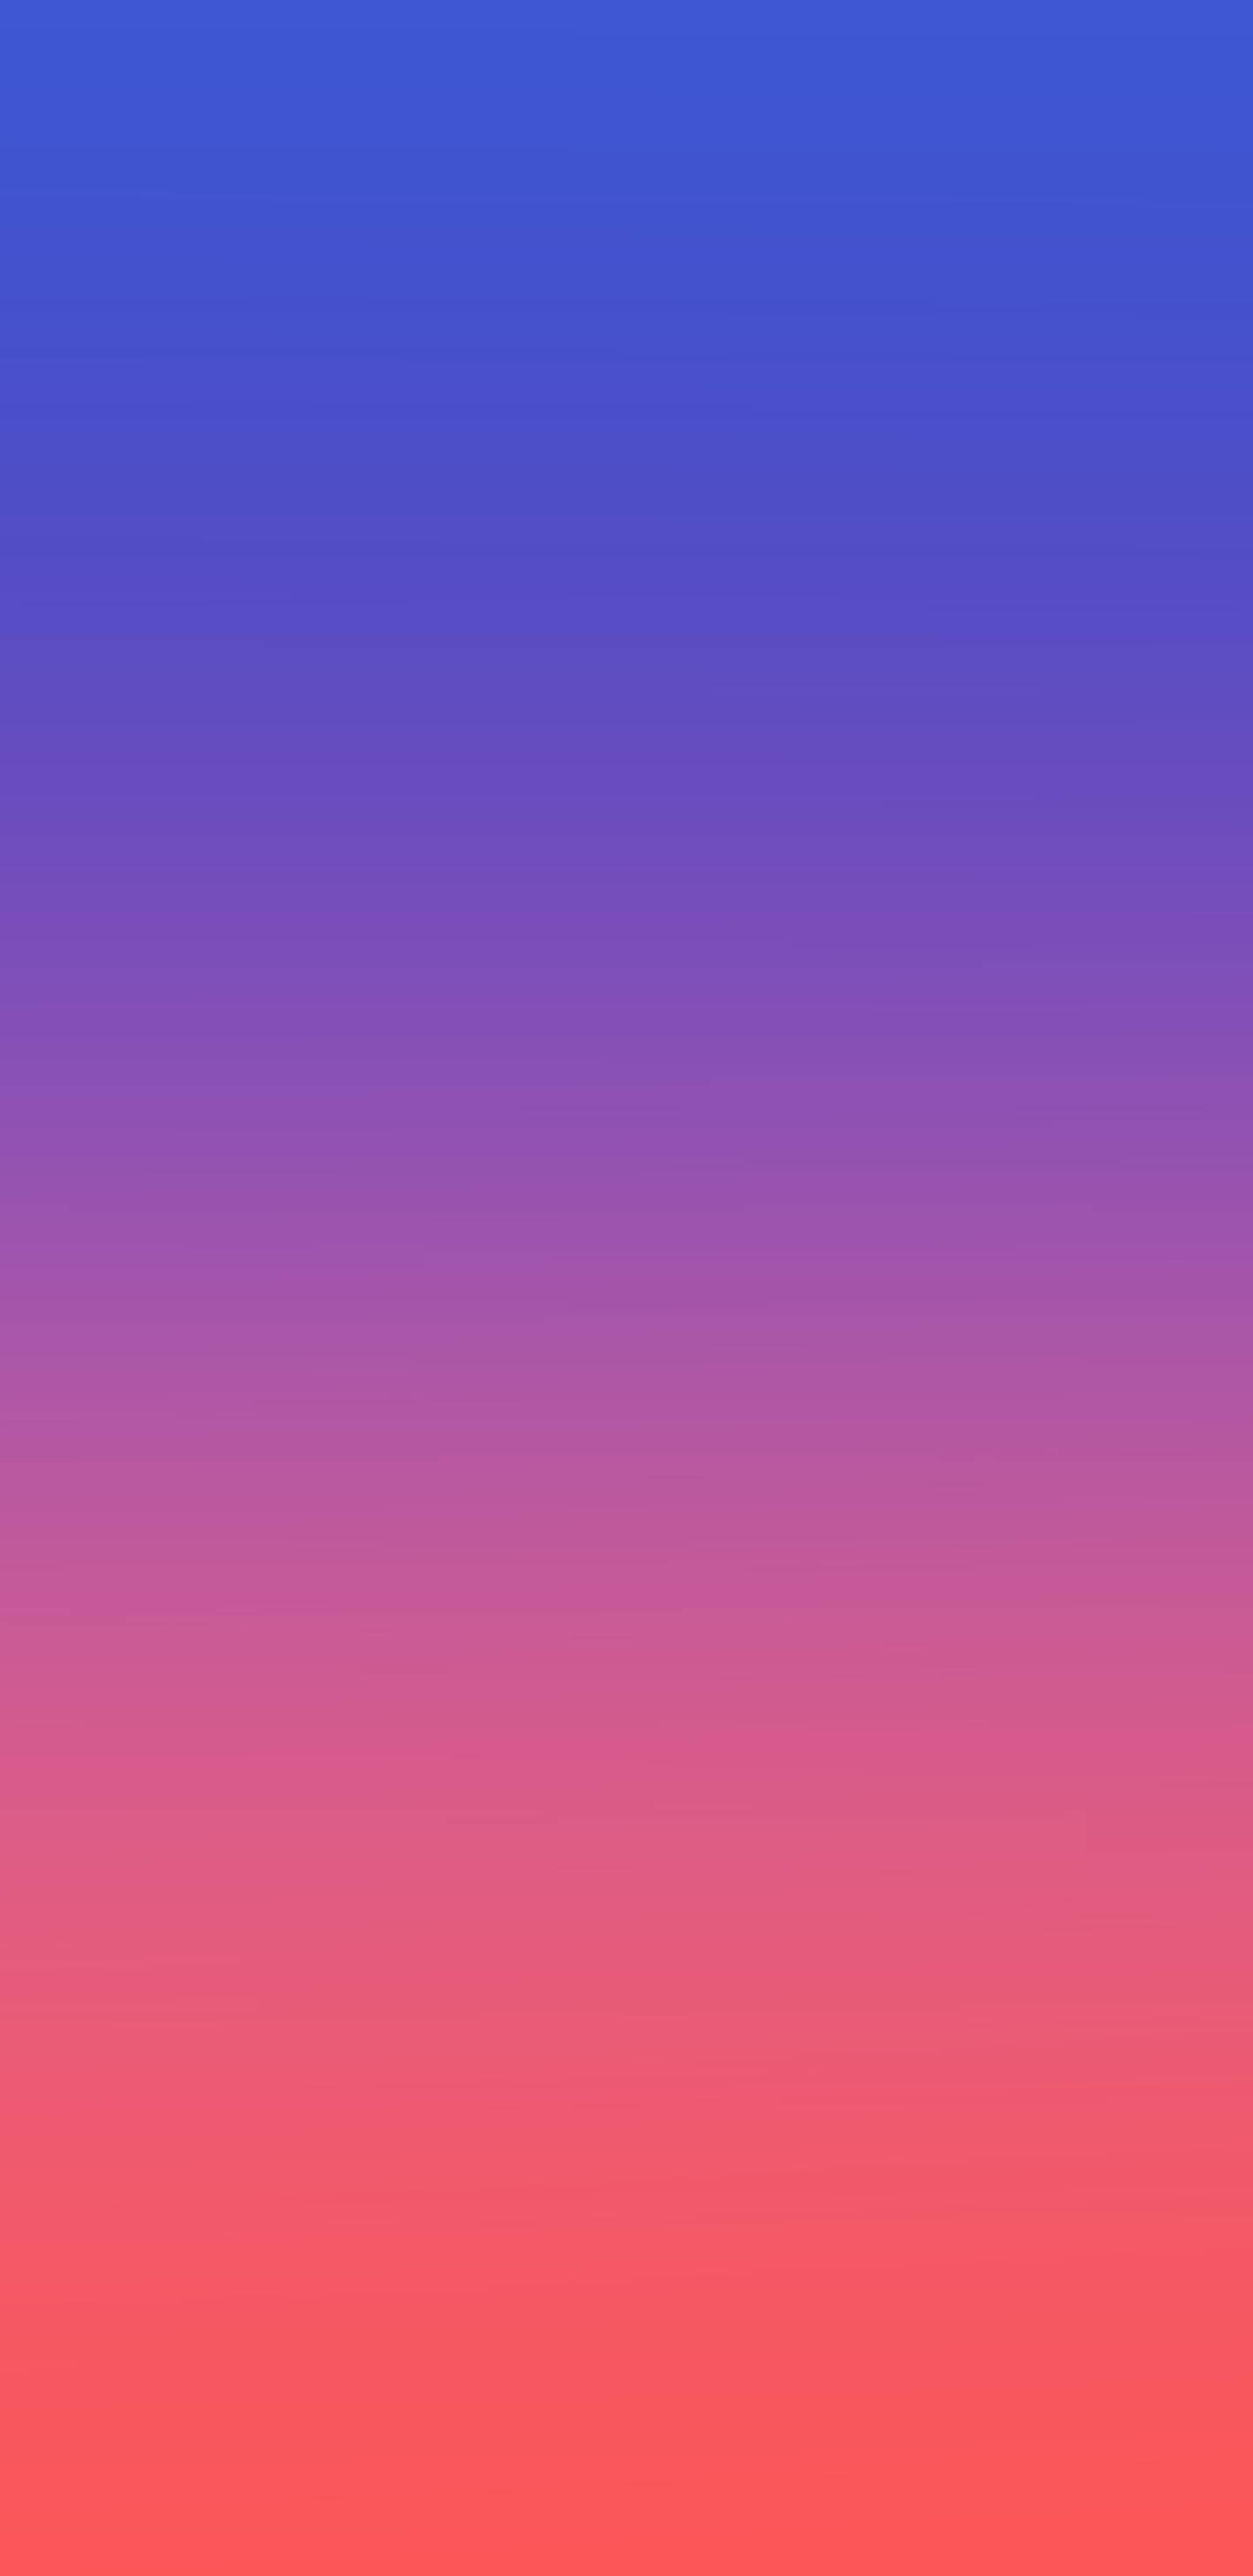 S10 Blue Pink Gradient Cover Background